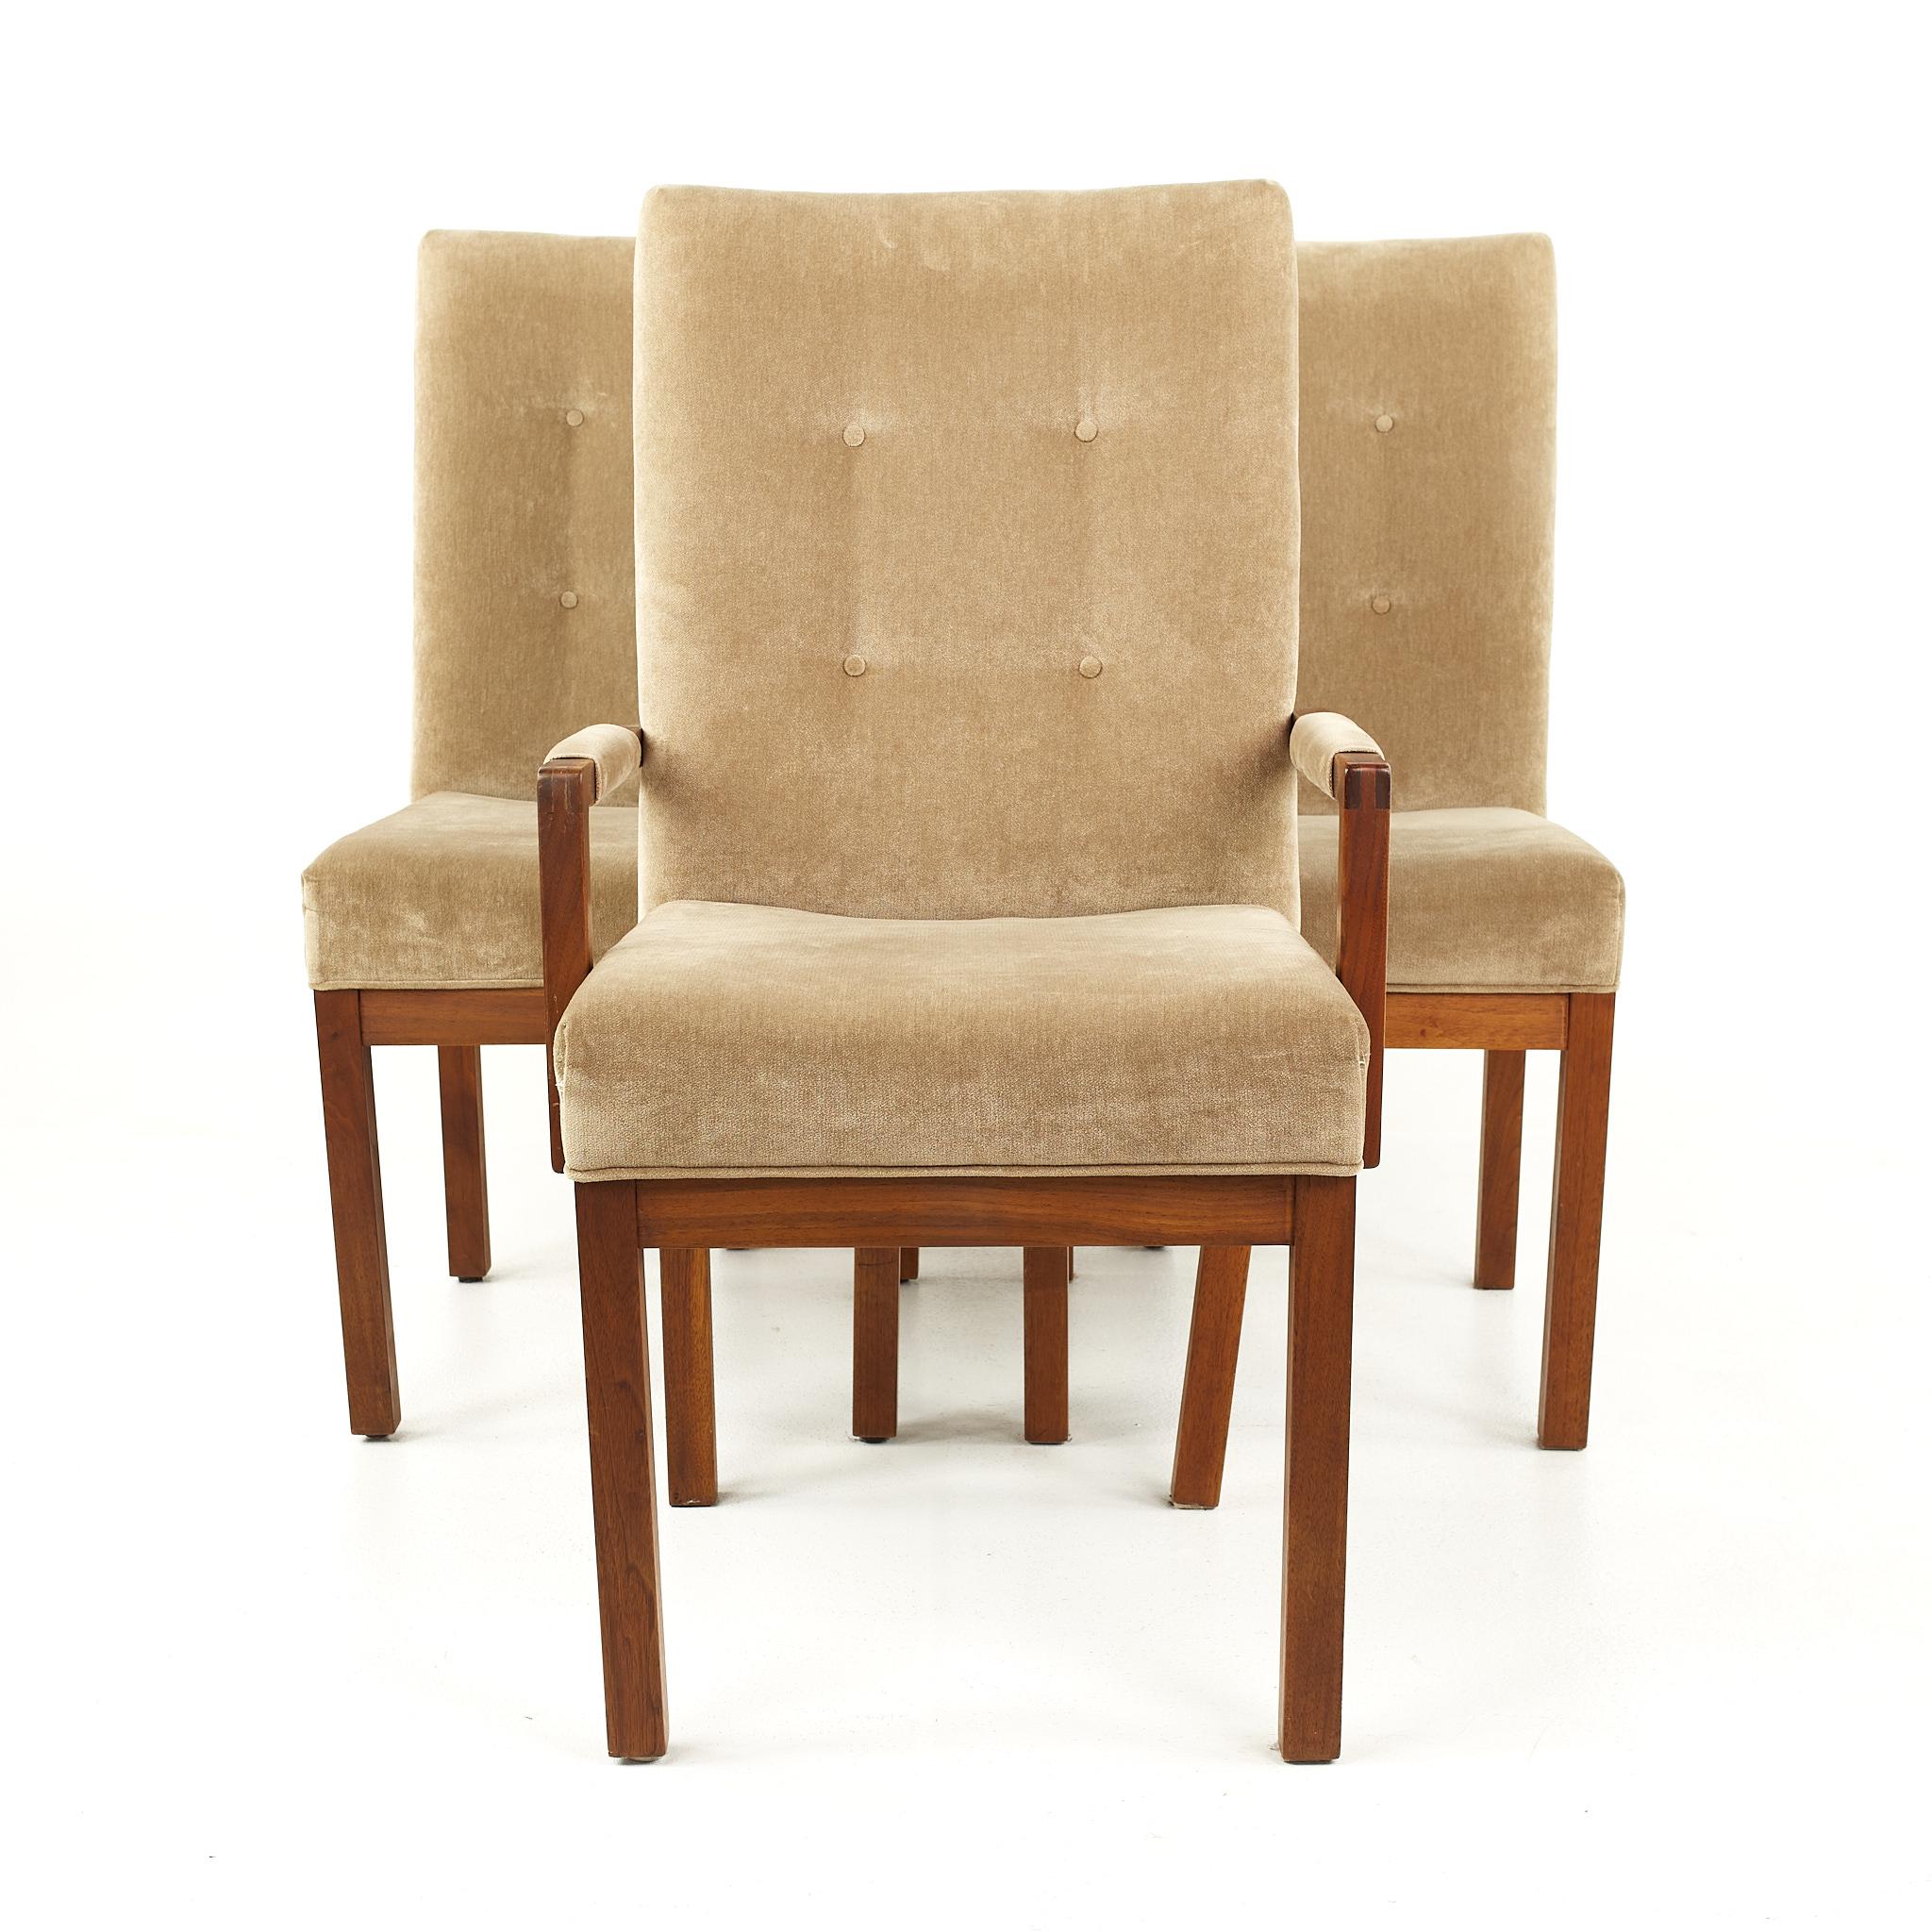 Dillingham Mid Century walnut tufted dining chairs - set of 4

Each chair measures: 20 wide x 22 deep x 41 inches high, with a seat height of 19.5 and arm height of 24.75 inches

All pieces of furniture can be had in what we call restored